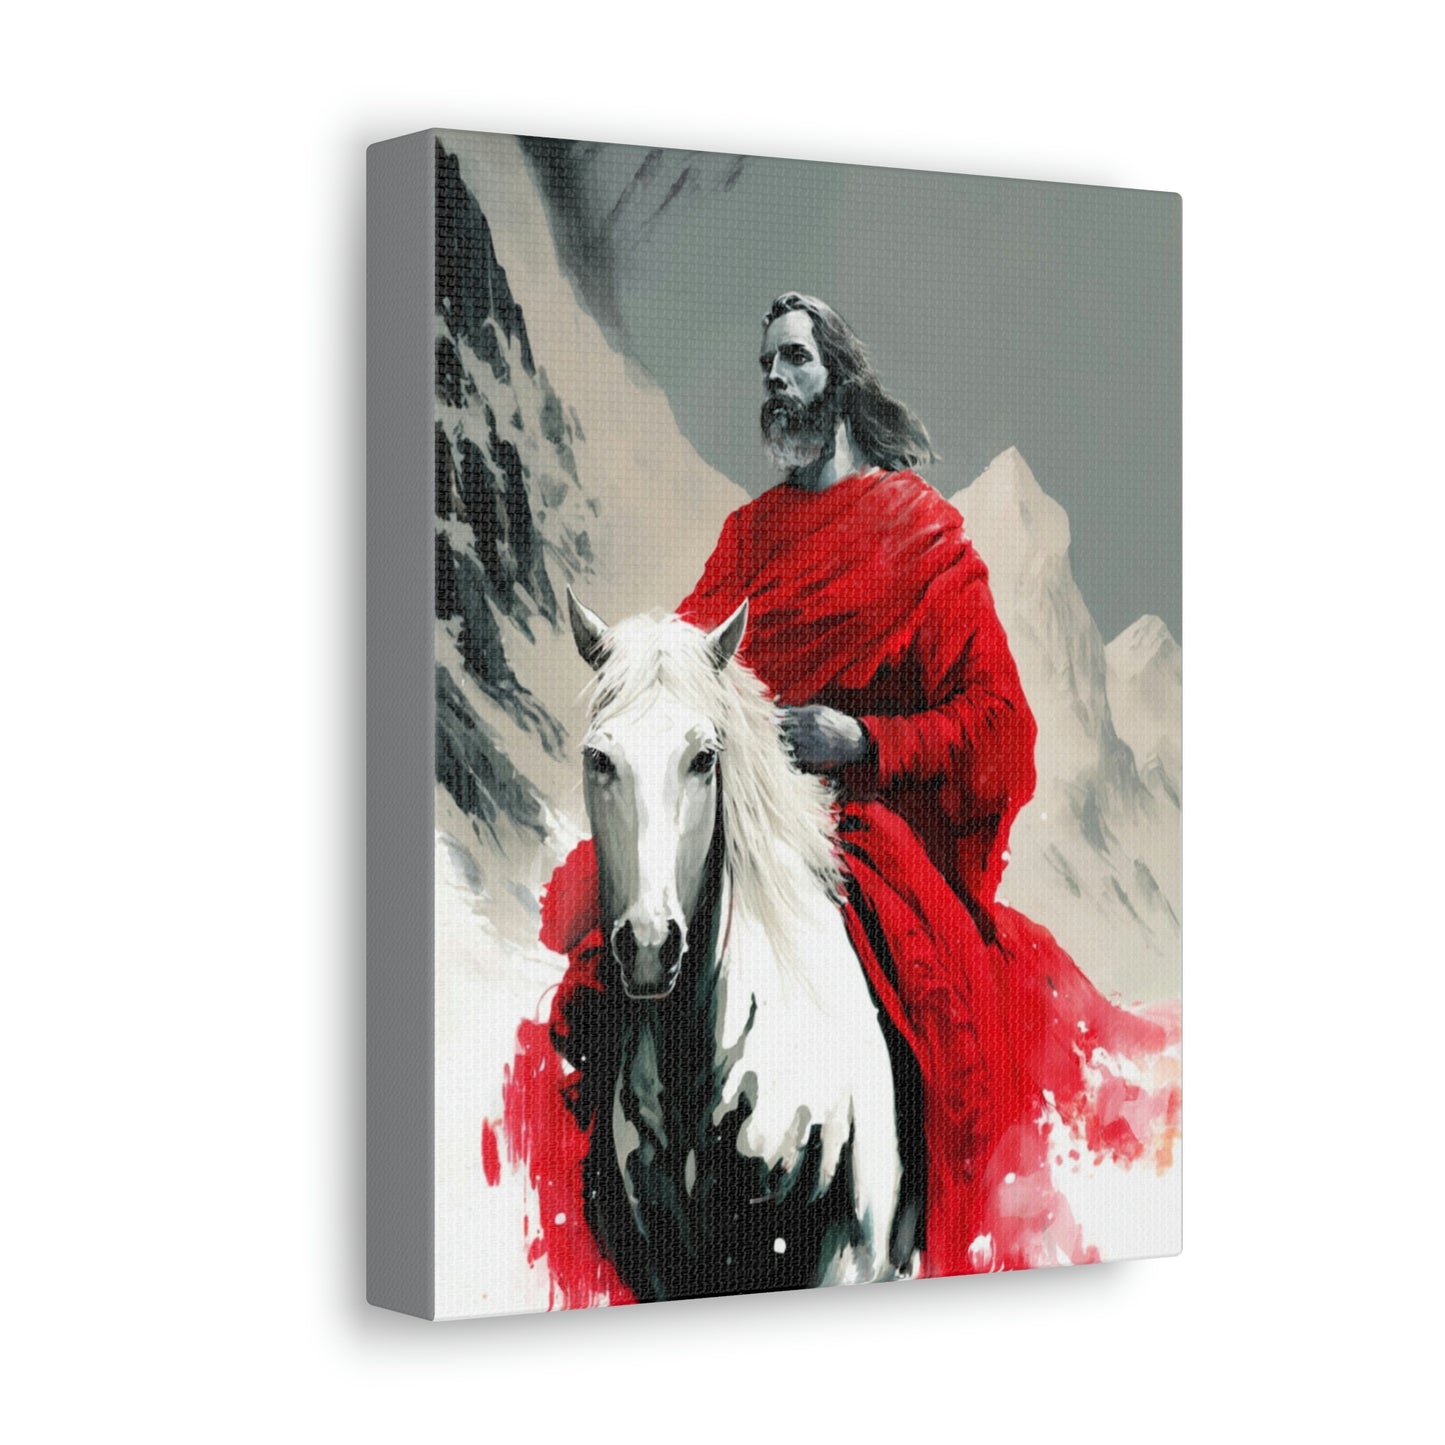 LDS Art - Art of The Second Coming of Jesus in Red on Horseback Premium Canvas Print